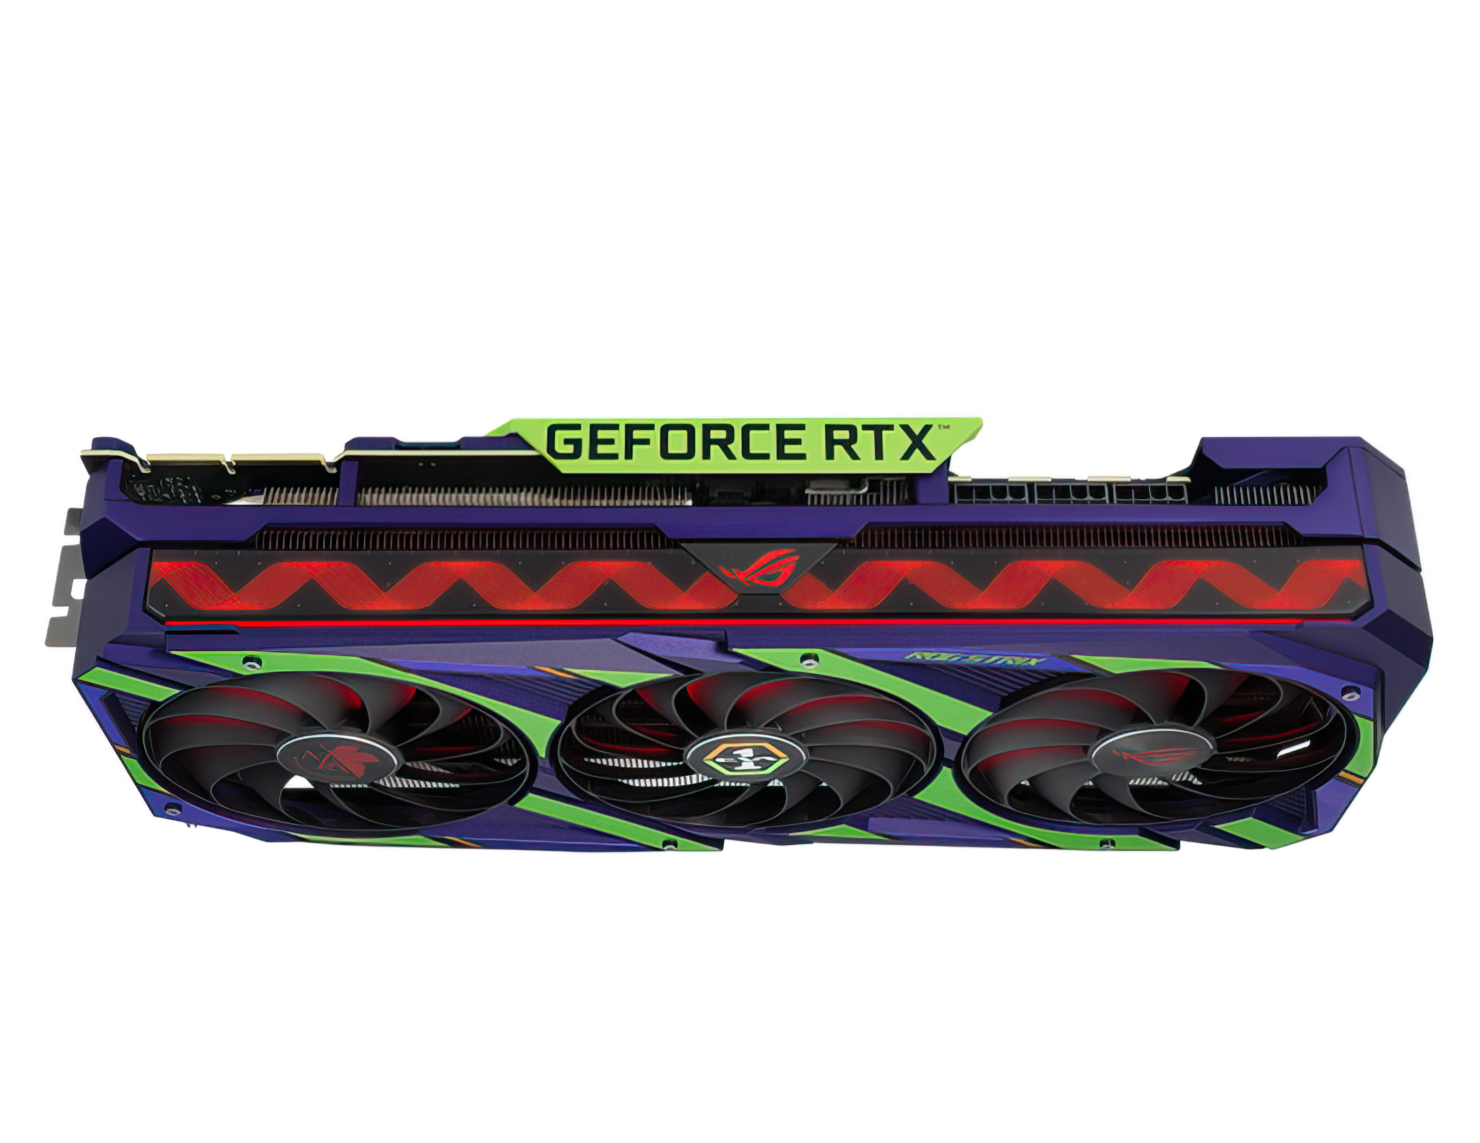 ASUS-ROG-Evangelion-Graphics-Card-EVA-01-ROG-RTX-3090-_4-low_res-scale-4_00x-1480x1143.png